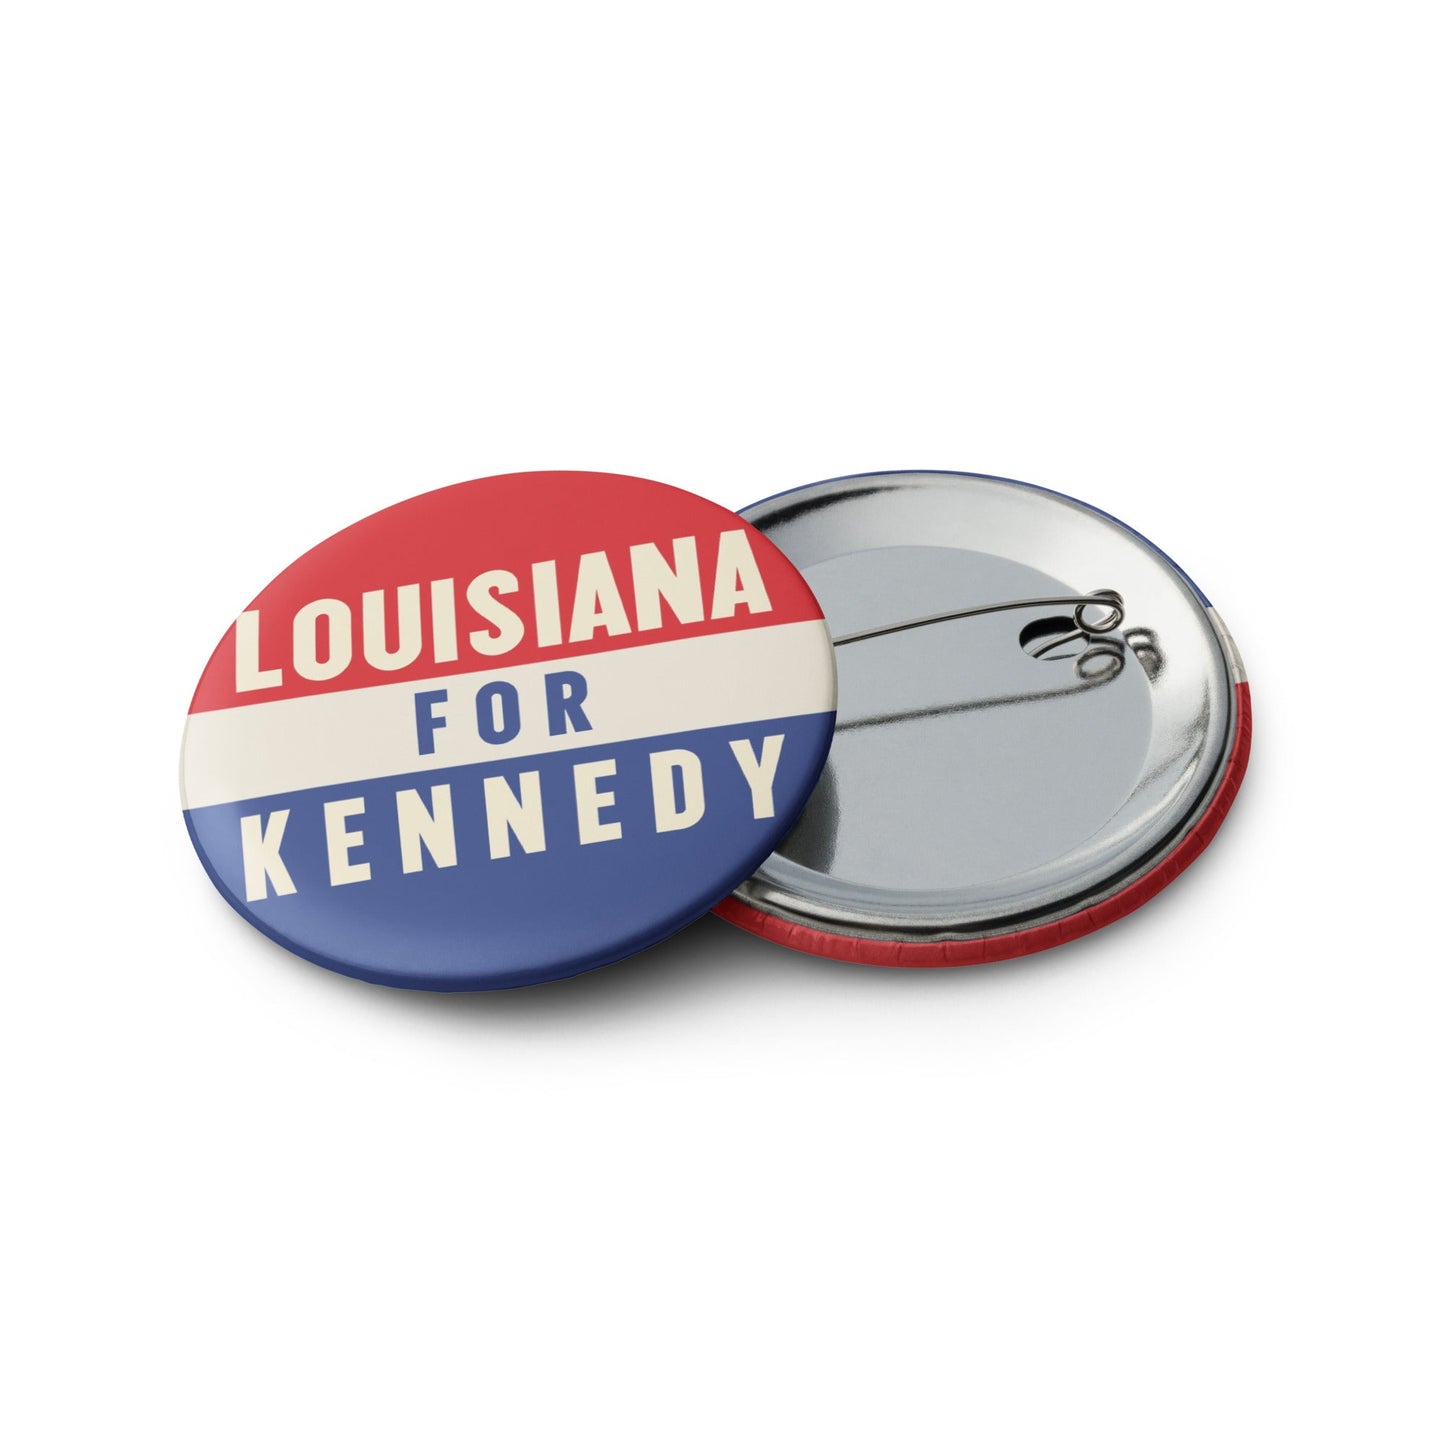 Louisiana for Kennedy (5 Buttons) - TEAM KENNEDY. All rights reserved